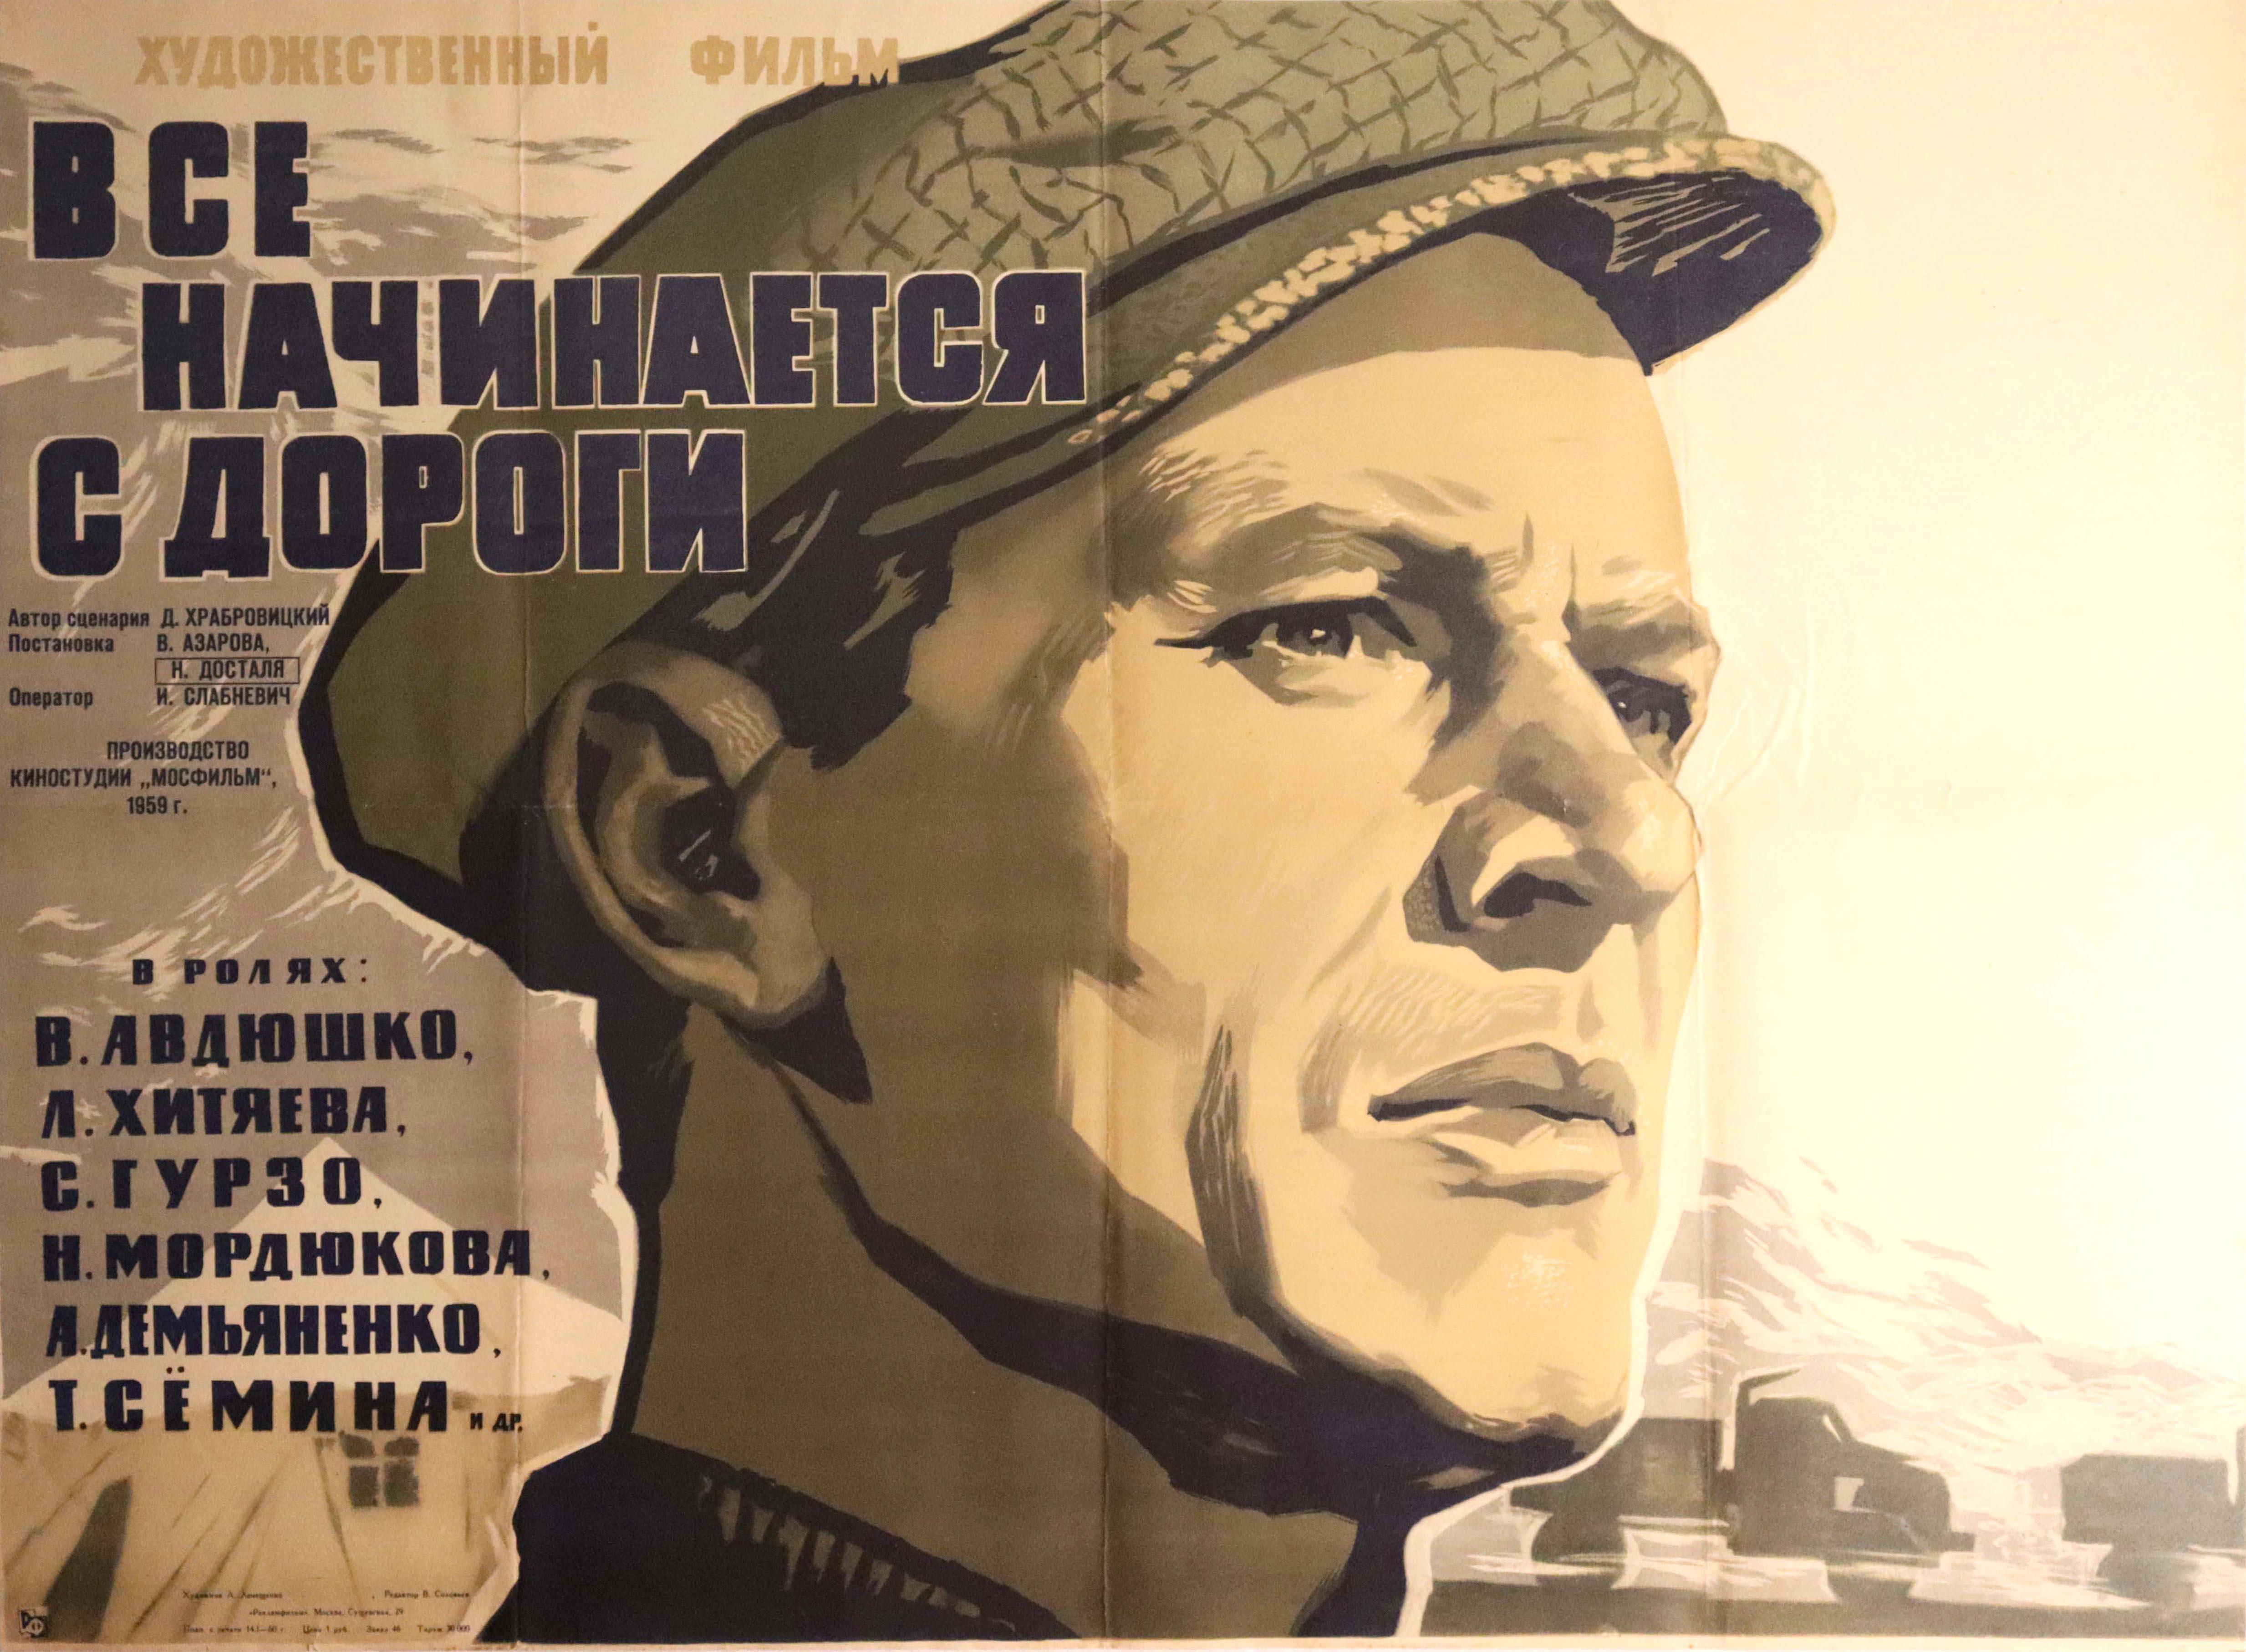 A. Lemeshchenko Print - Original Vintage Film Poster - Everything Begins With Hitting The Road - Siberia